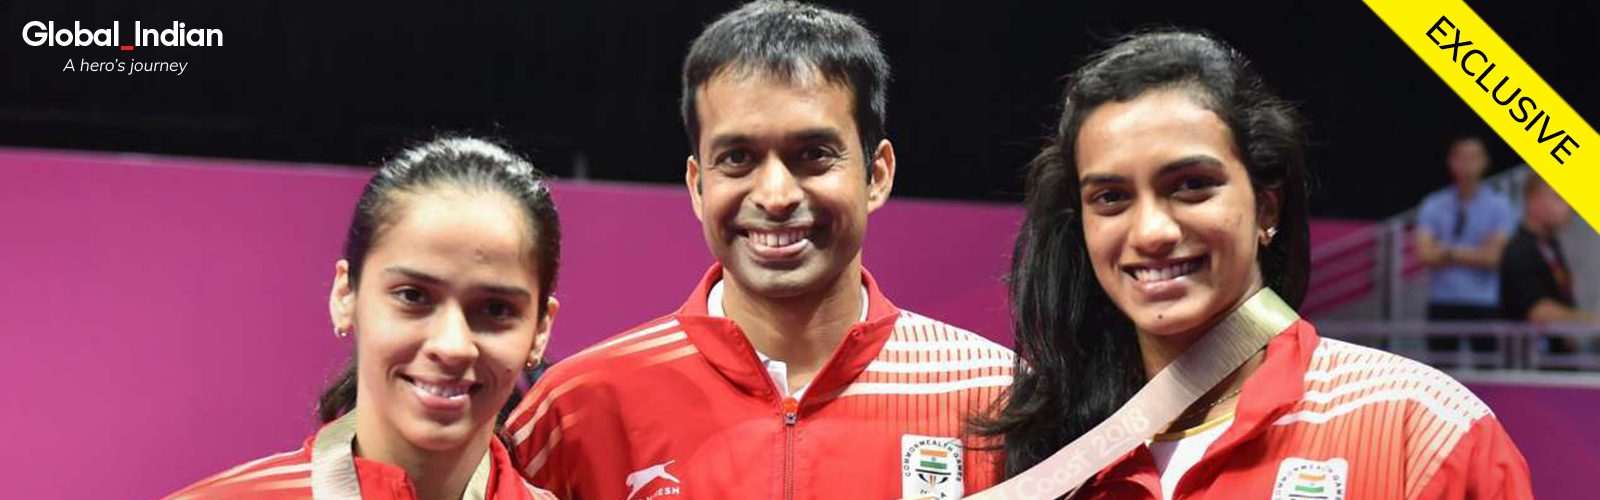 Stick to roots, conquer the world: Pullela Gopichand’s journey as an athlete and coach